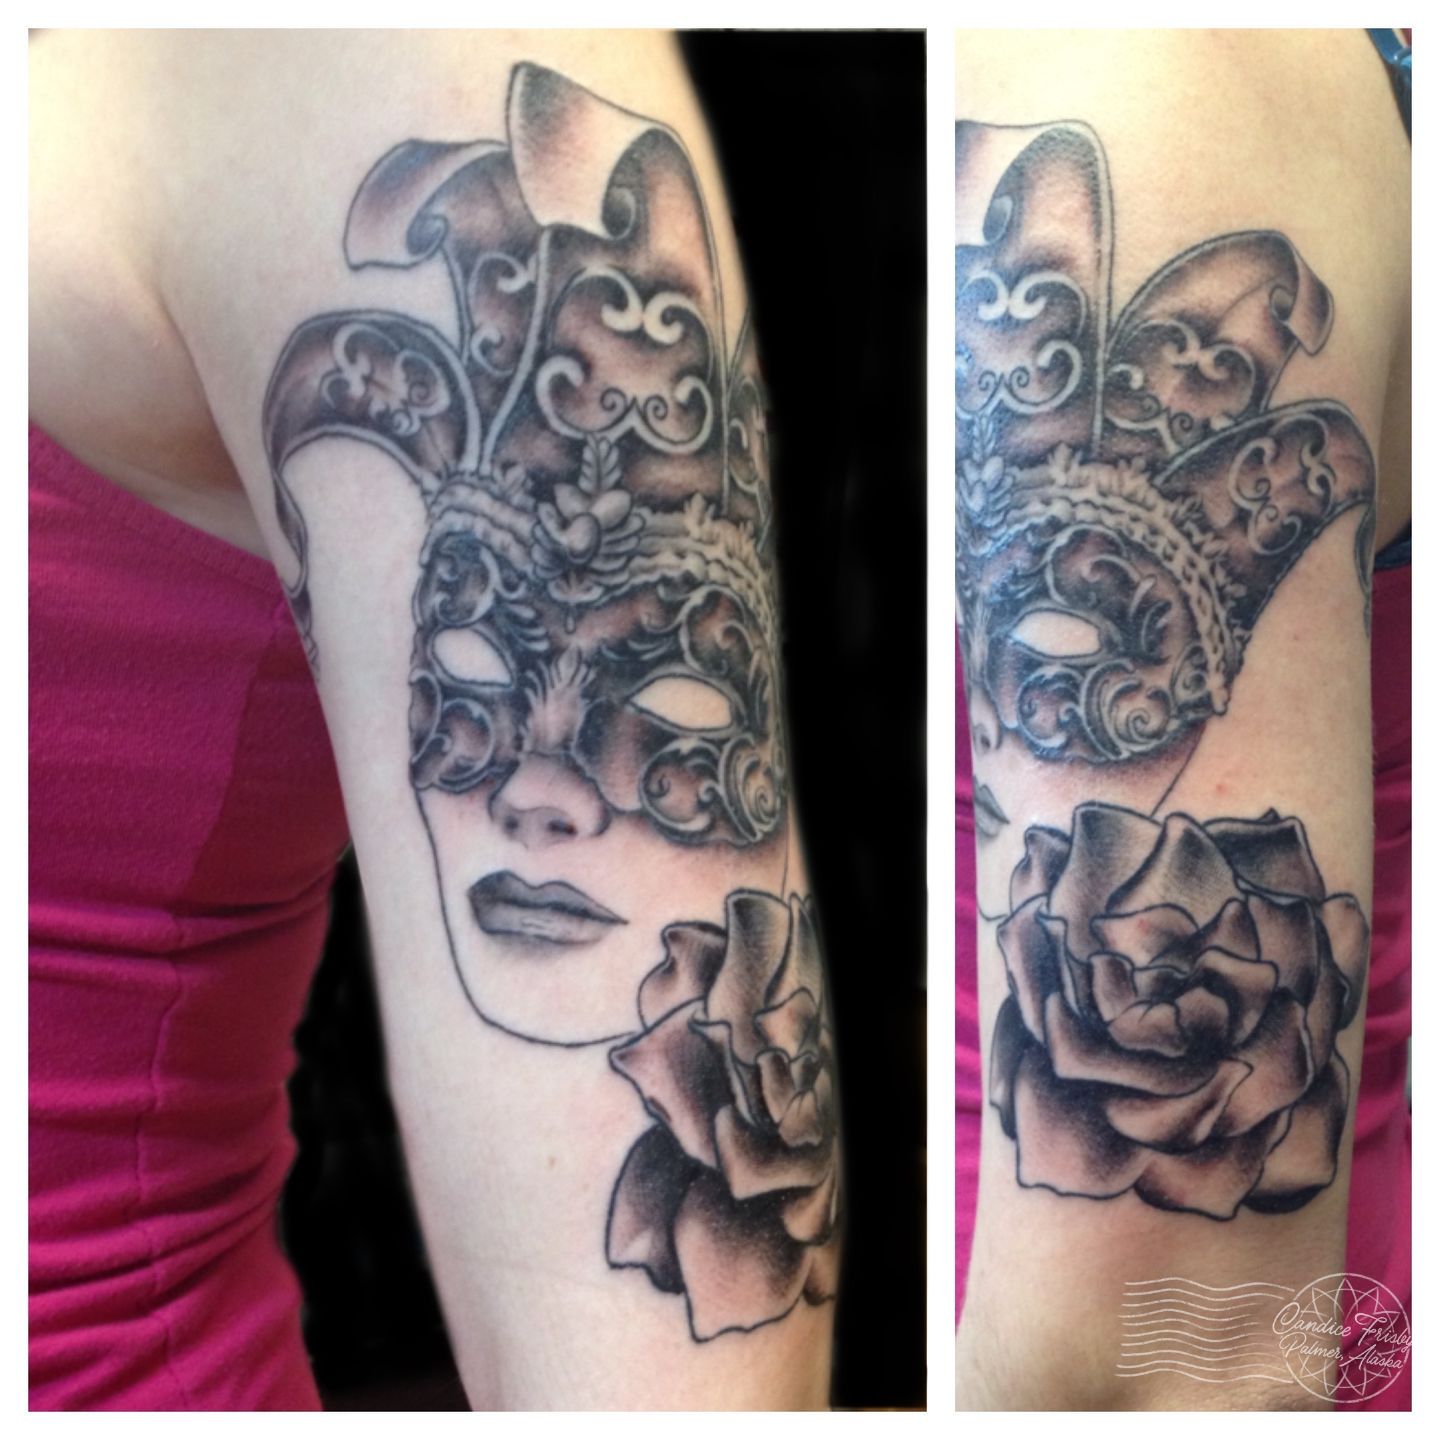 Tattoo I made yesterday at True Grit tattoo Albuquerque NM  rtattoo